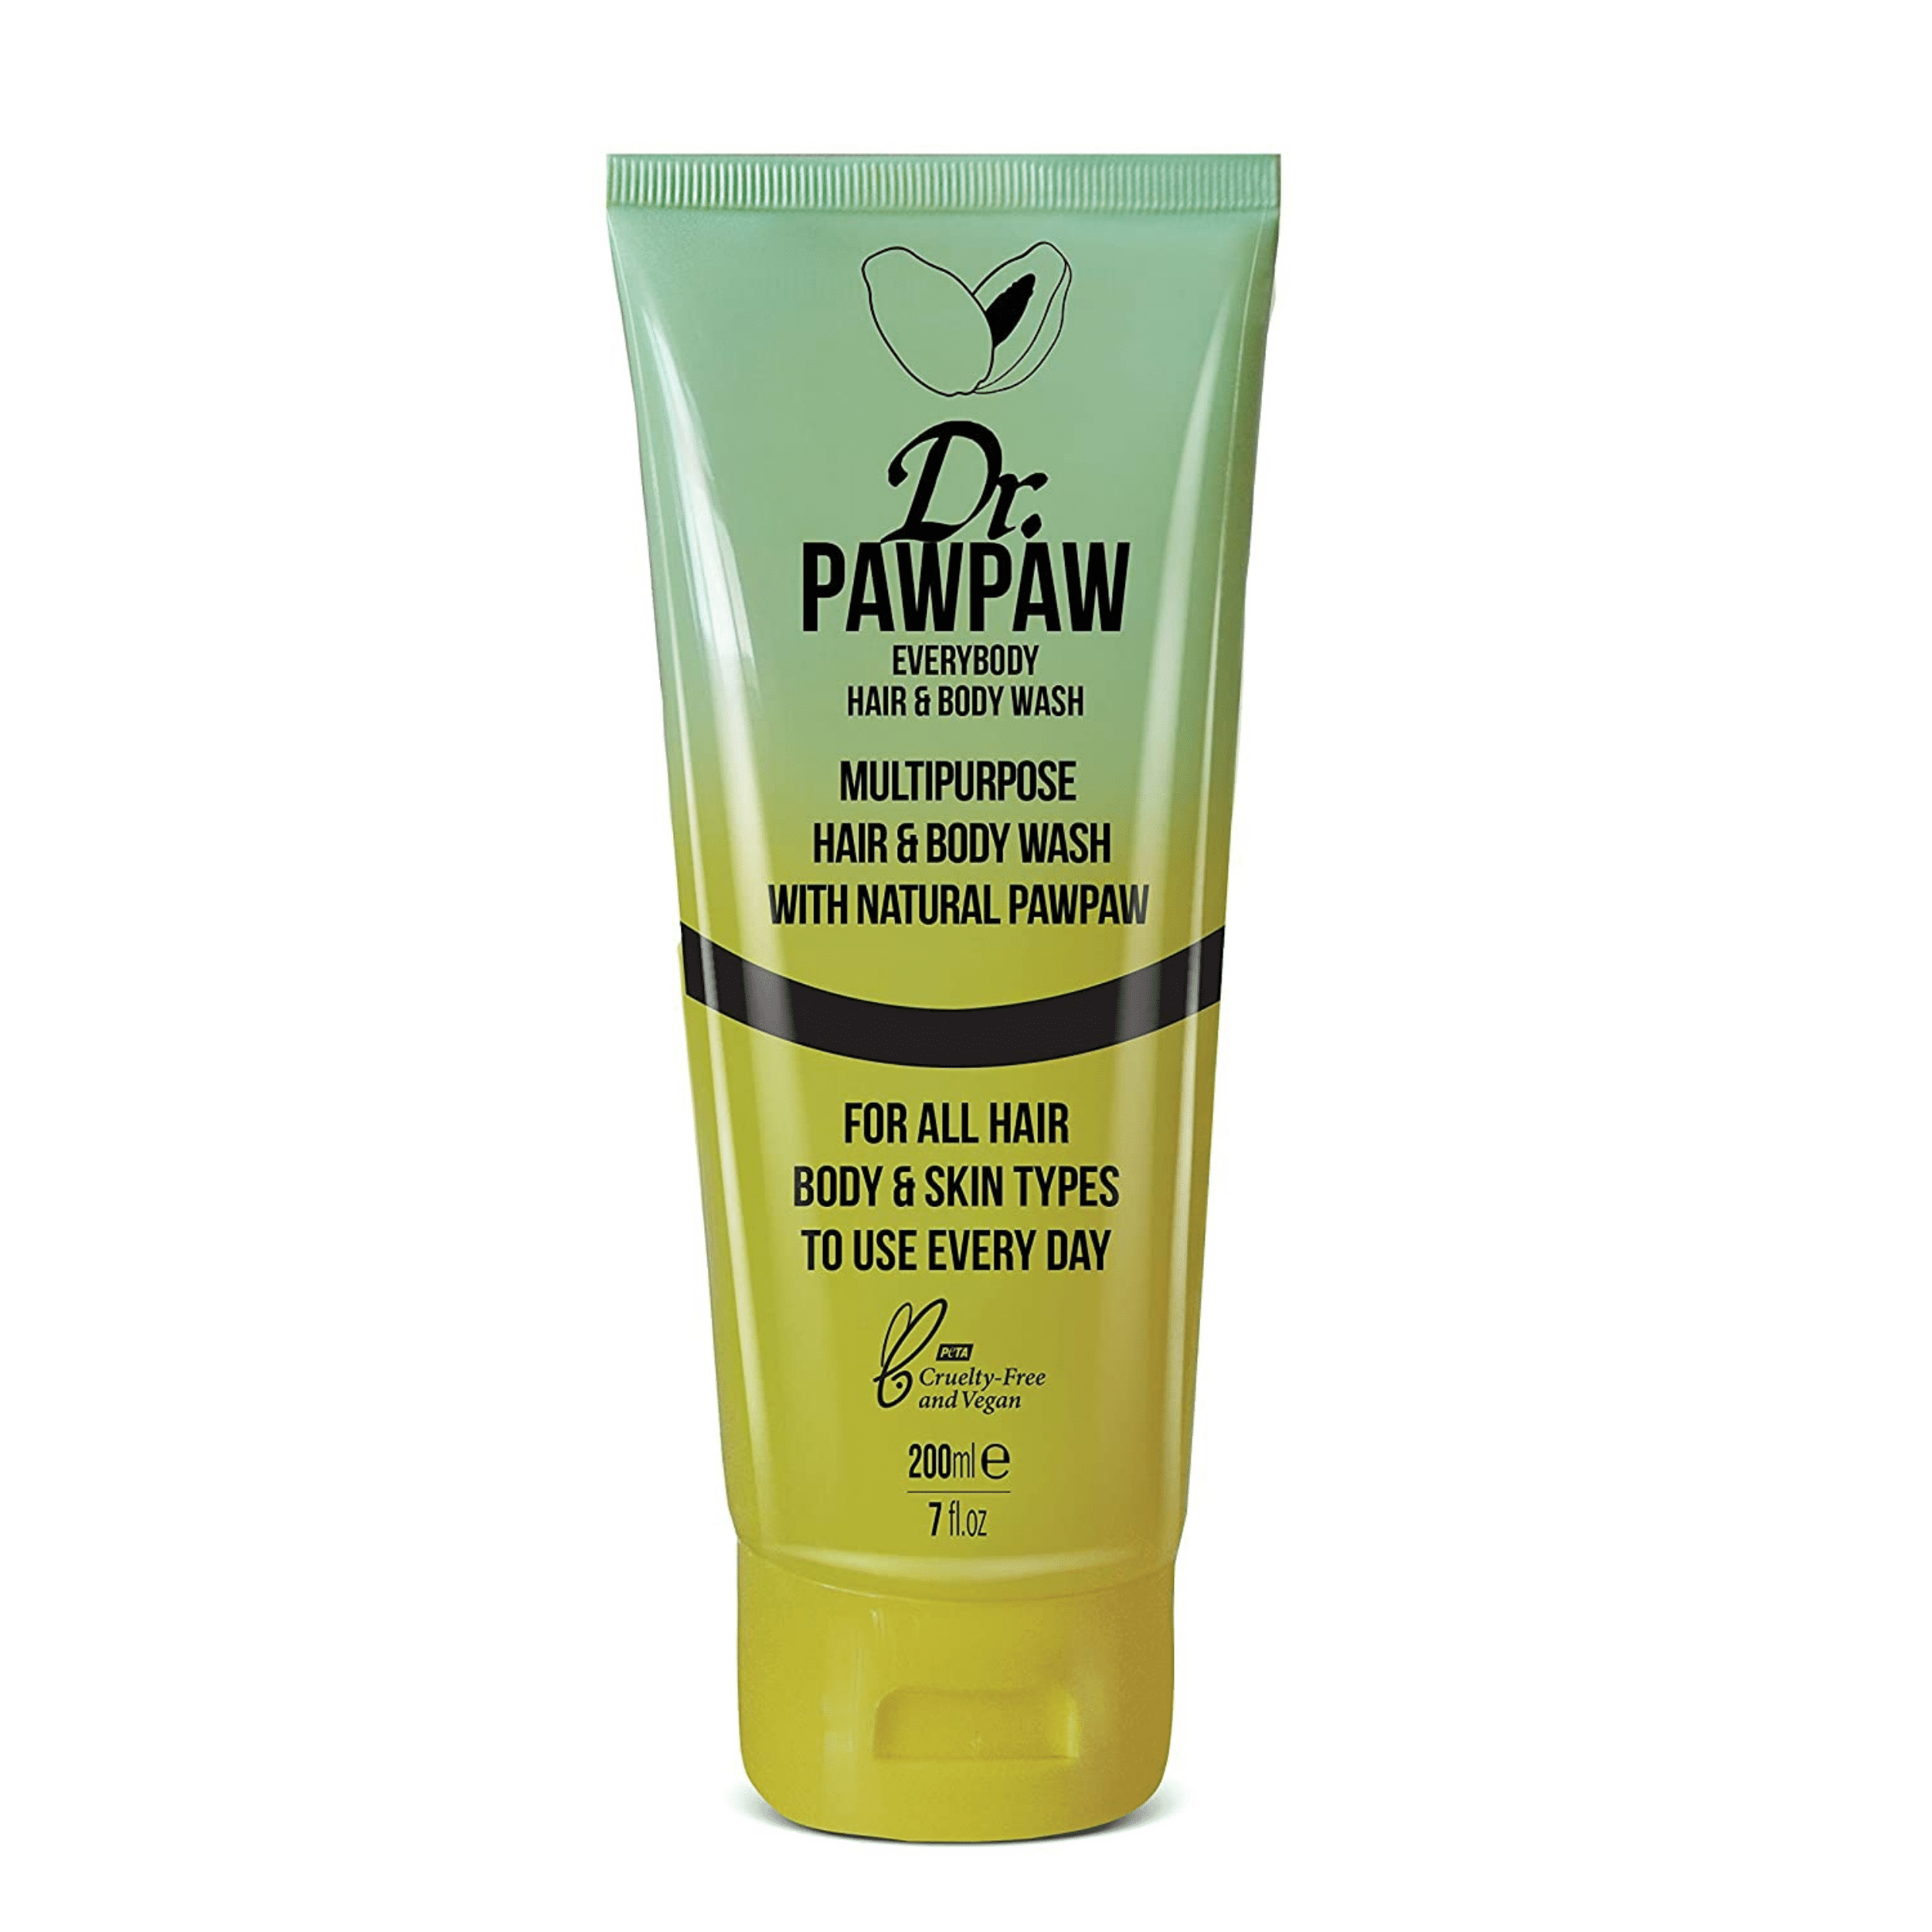 Dr. PAWPAW - Hair & Body | Multipurpose Hair & Body Cleanse and Condition with Natural PAWPAW | Safe For All Hair, Body & Skin Types (200 ml) (Hair & Body Wash) - Walmart.com